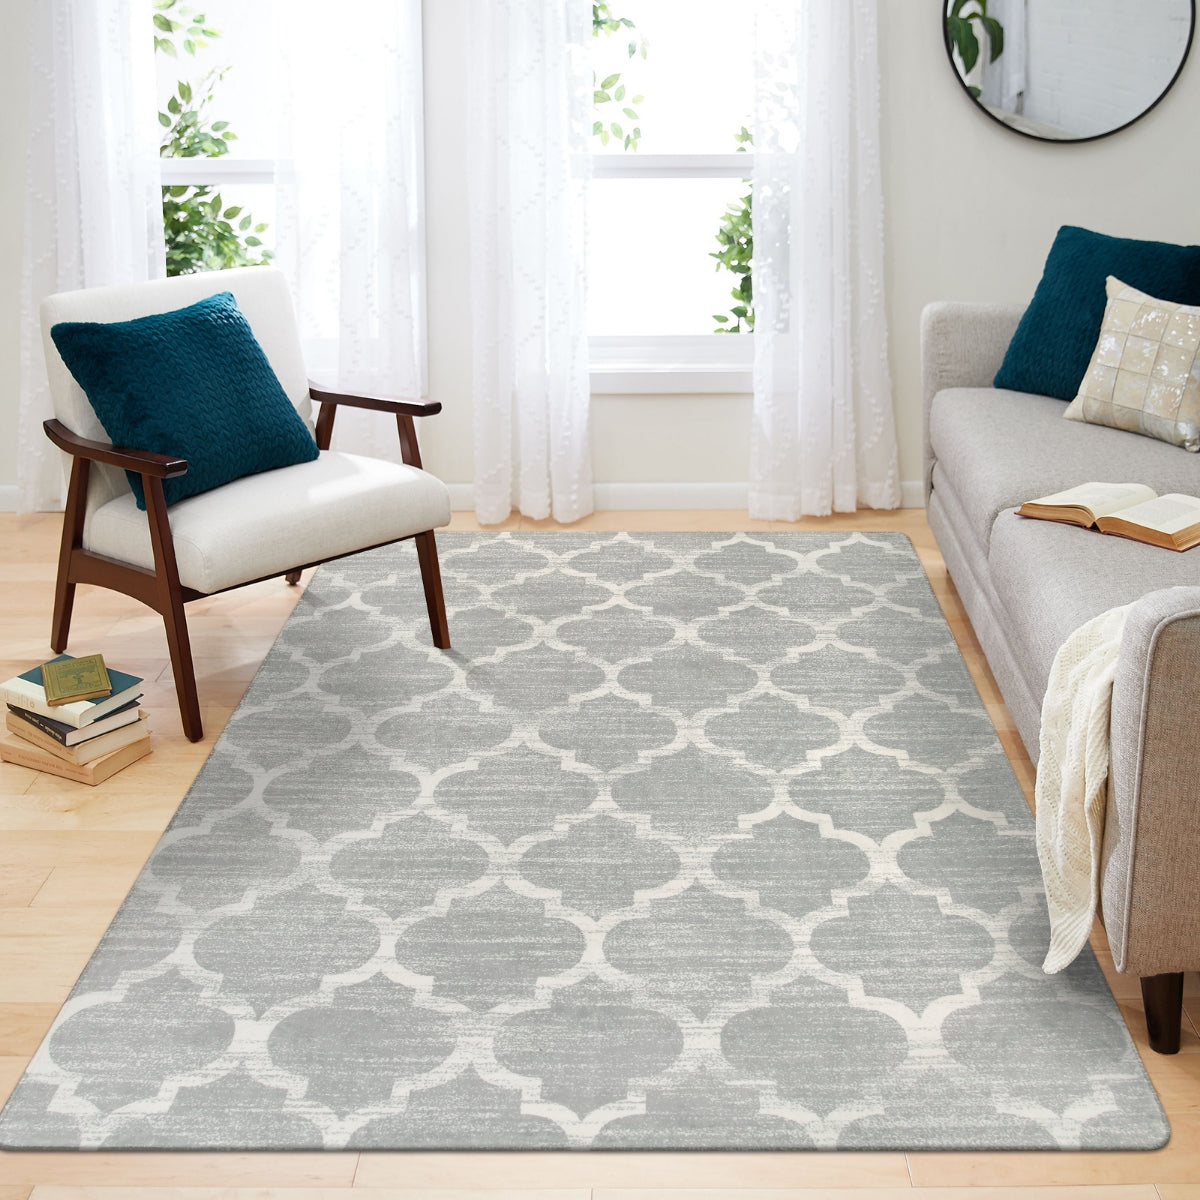 Lahome Moroccan Washable Living Room Rugs - 3x5 Area Rugs for